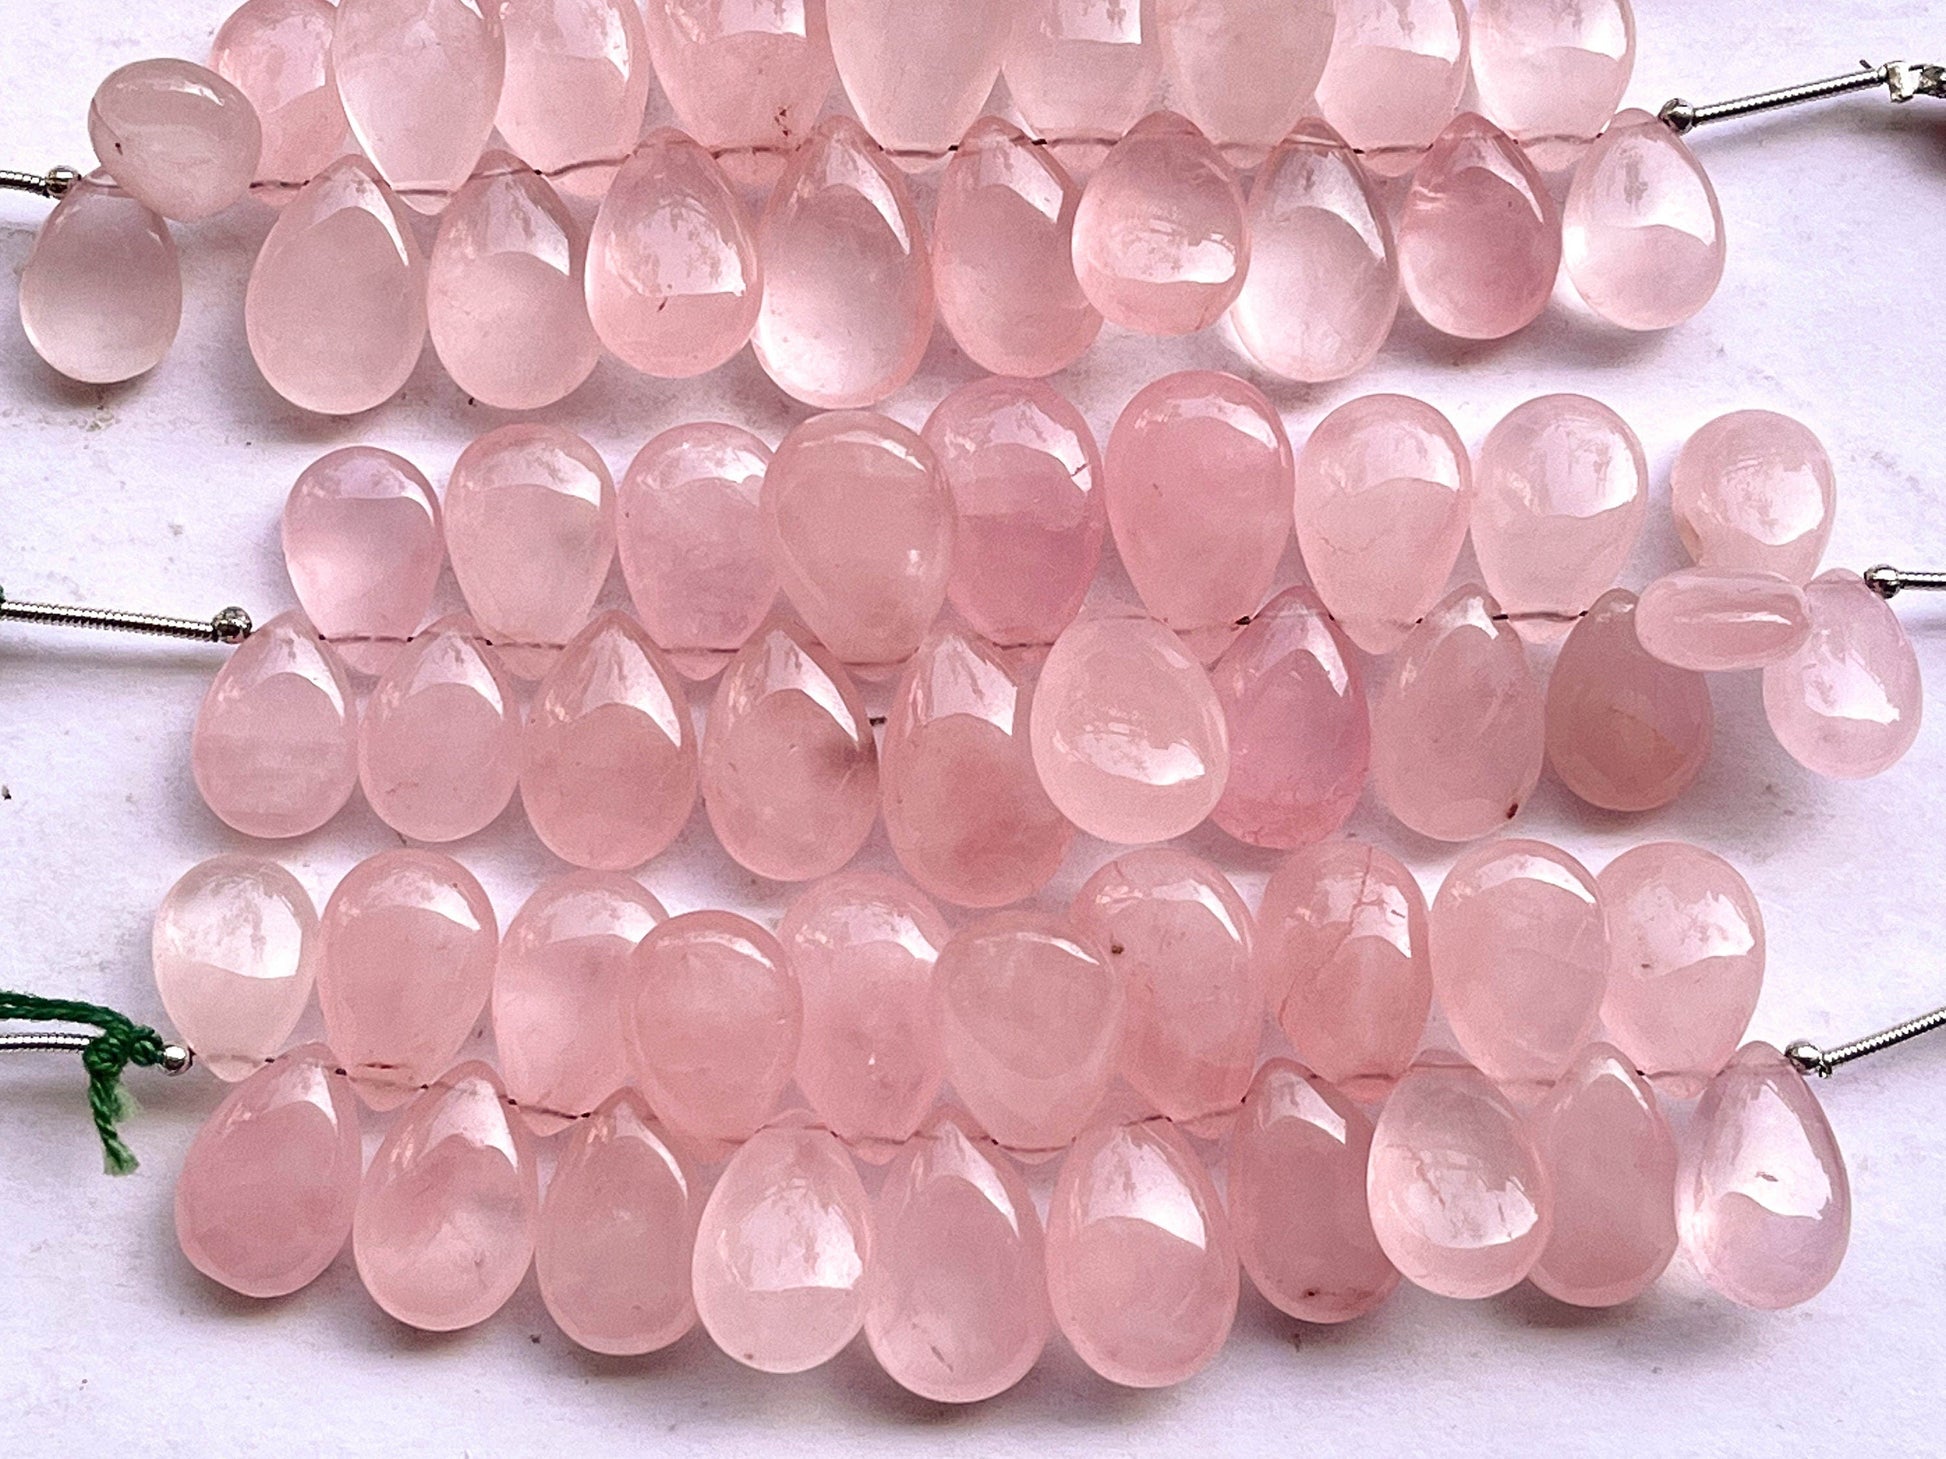 20 Pieces Natural Rose Quartz Smooth Pear Shape Briolette Beads Beadsforyourjewelry